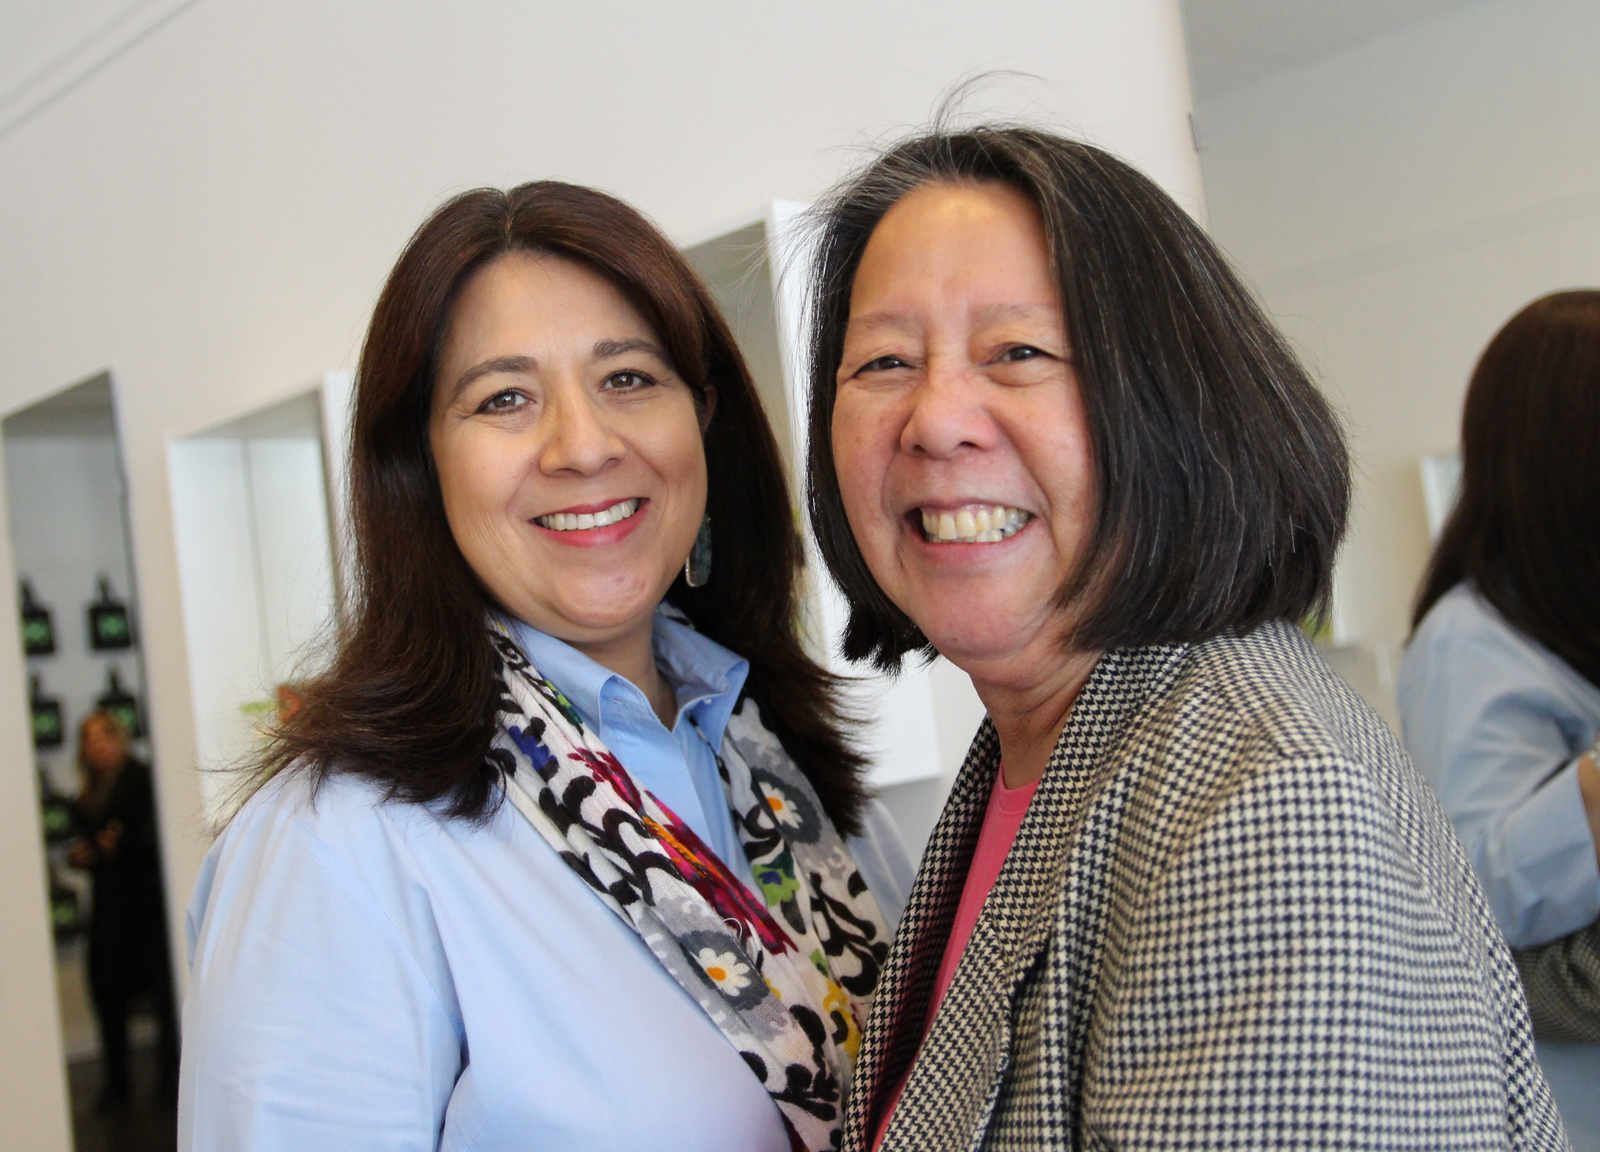 Laura Delaflor and Mamie Lee, members of the board of The Undies Project photographed at Susan Hanover Designs, Jan 24, 2018 Photo: Leslie Yager